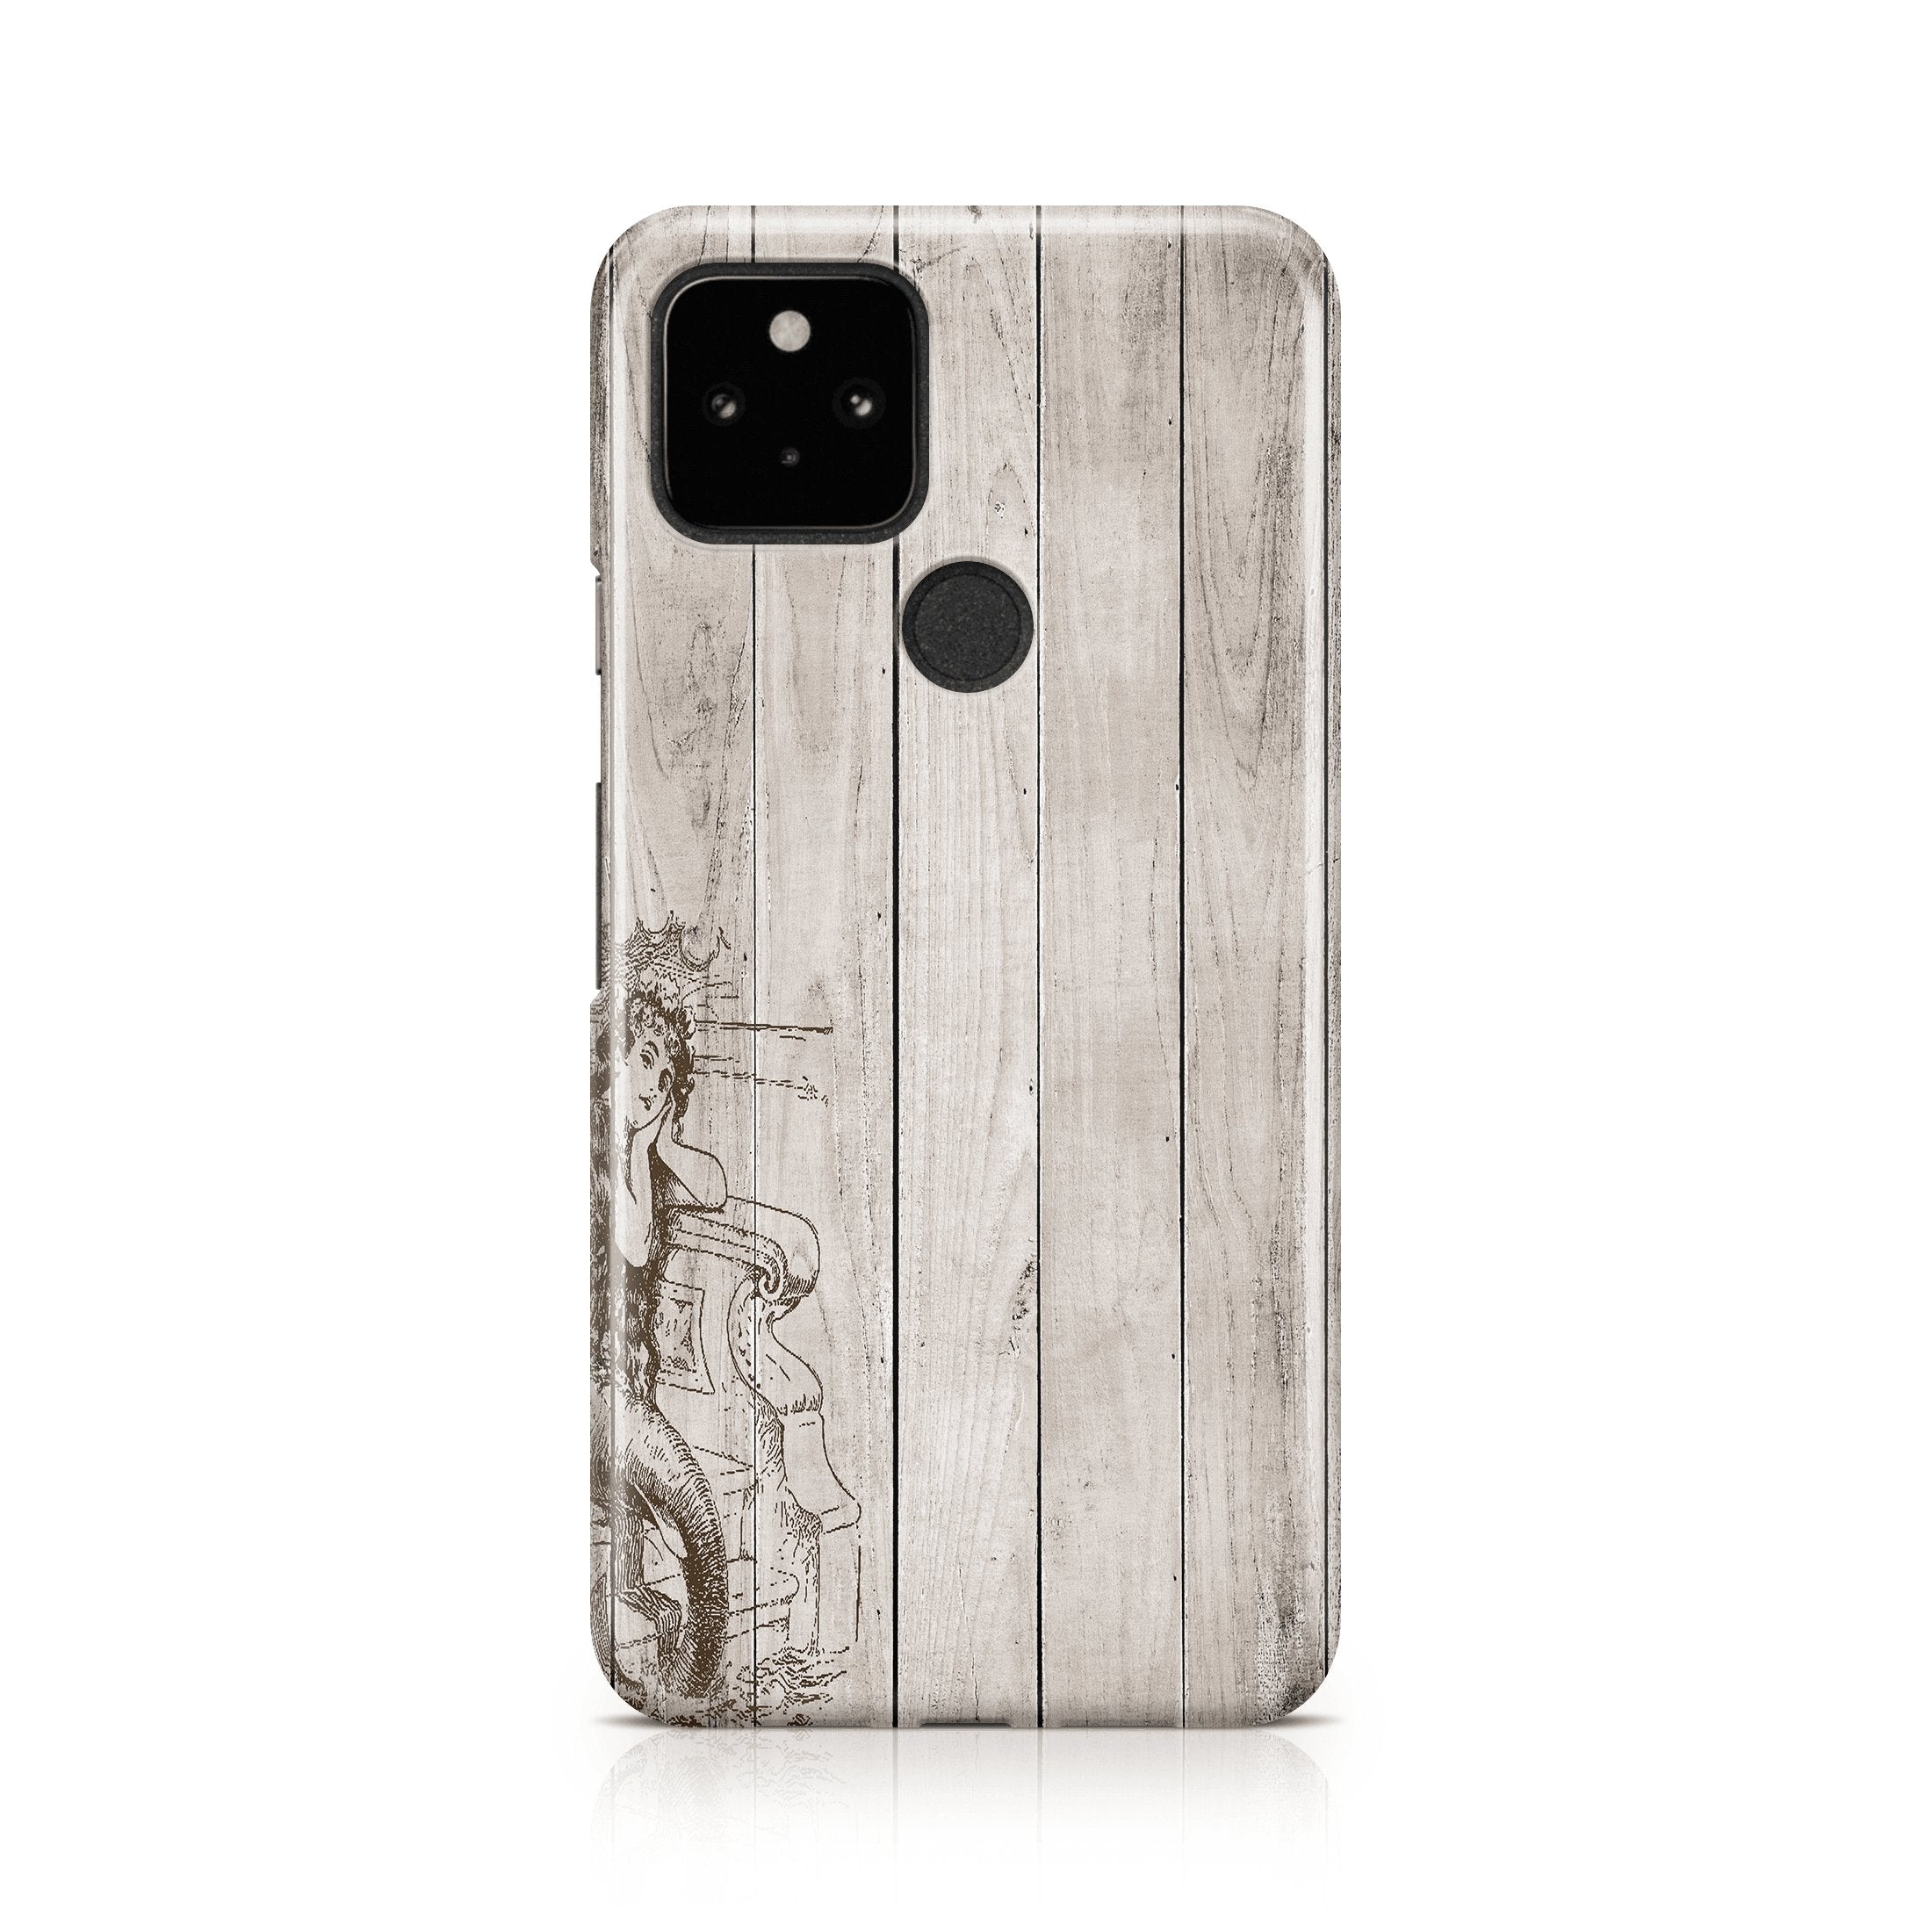 Sea Whisper - Google phone case designs by CaseSwagger